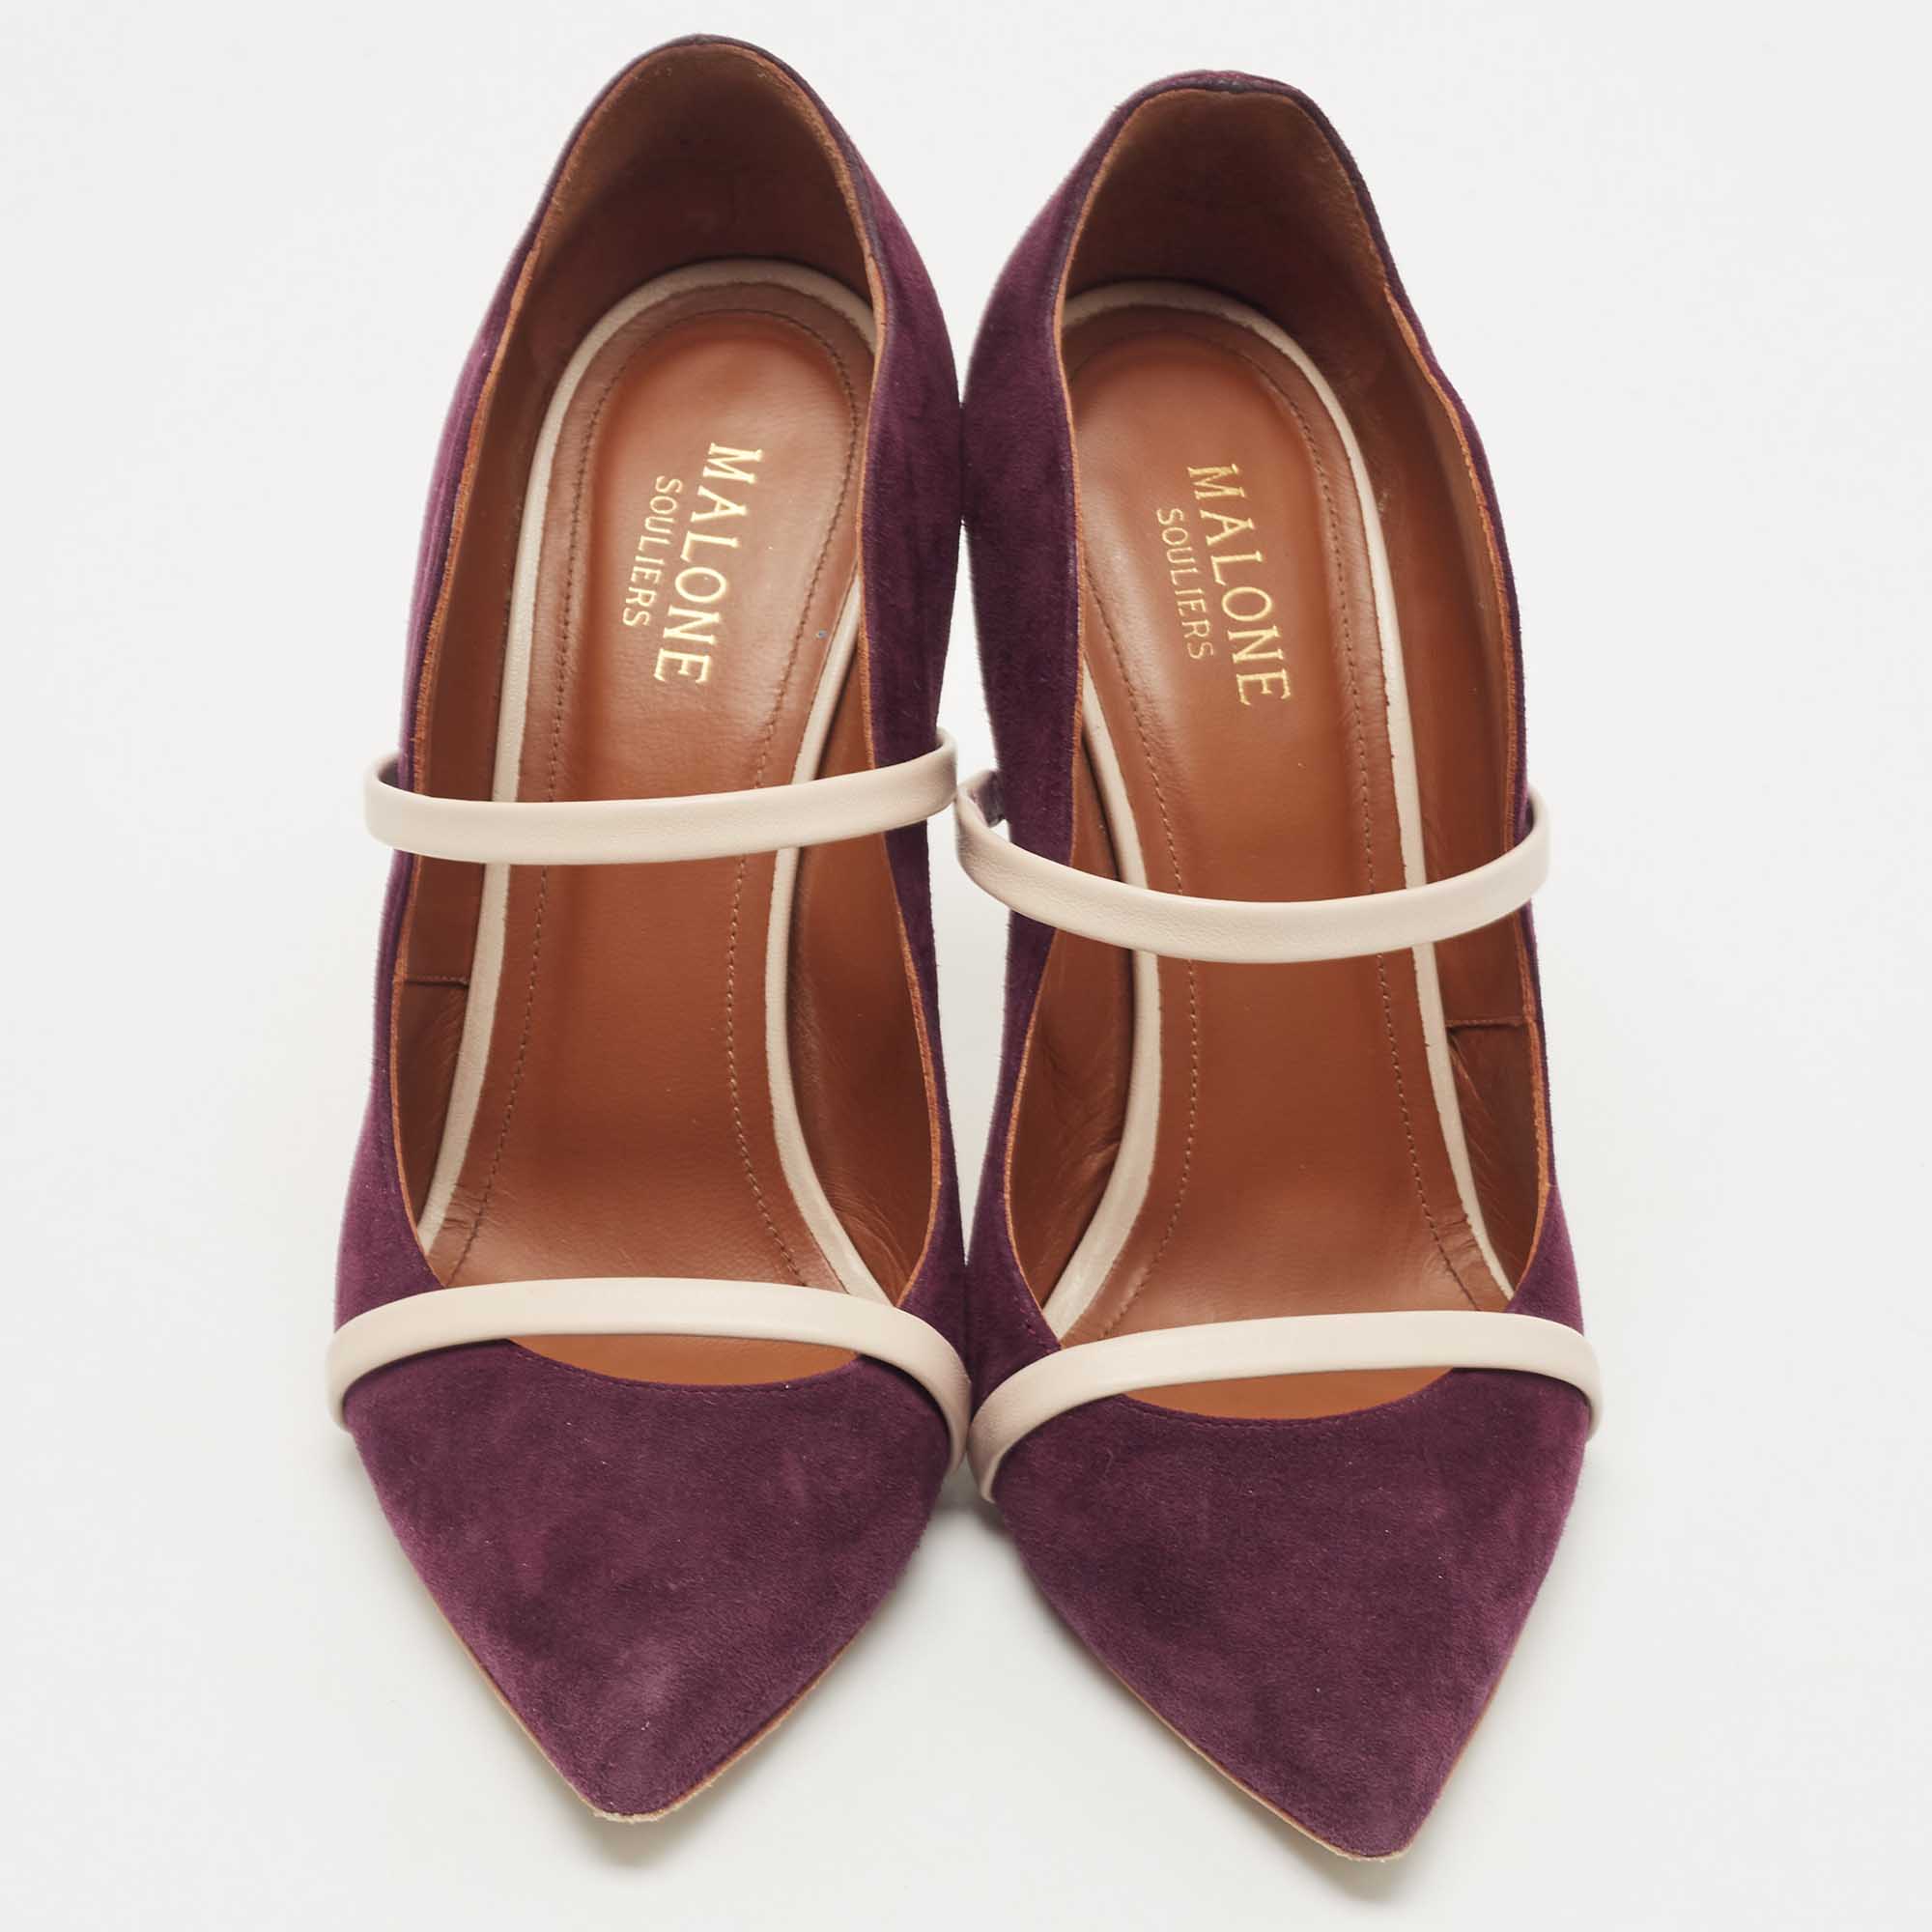 Malone Souliers Burgundy/Beige Suede And Leather Maureen Pumps Size 38